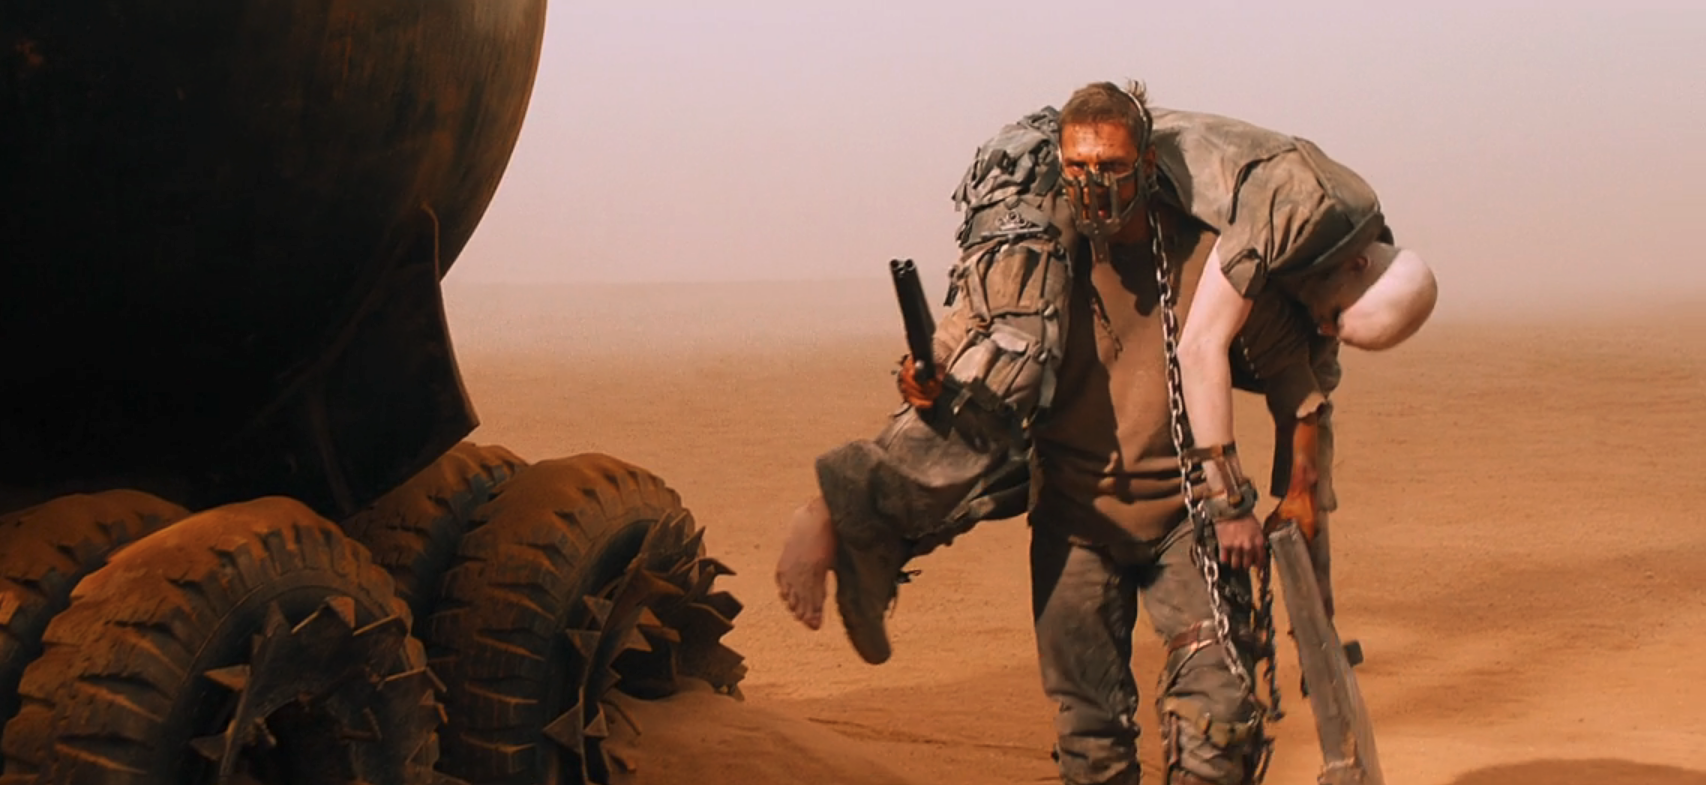 3 practical ways Fury Road binds characters together